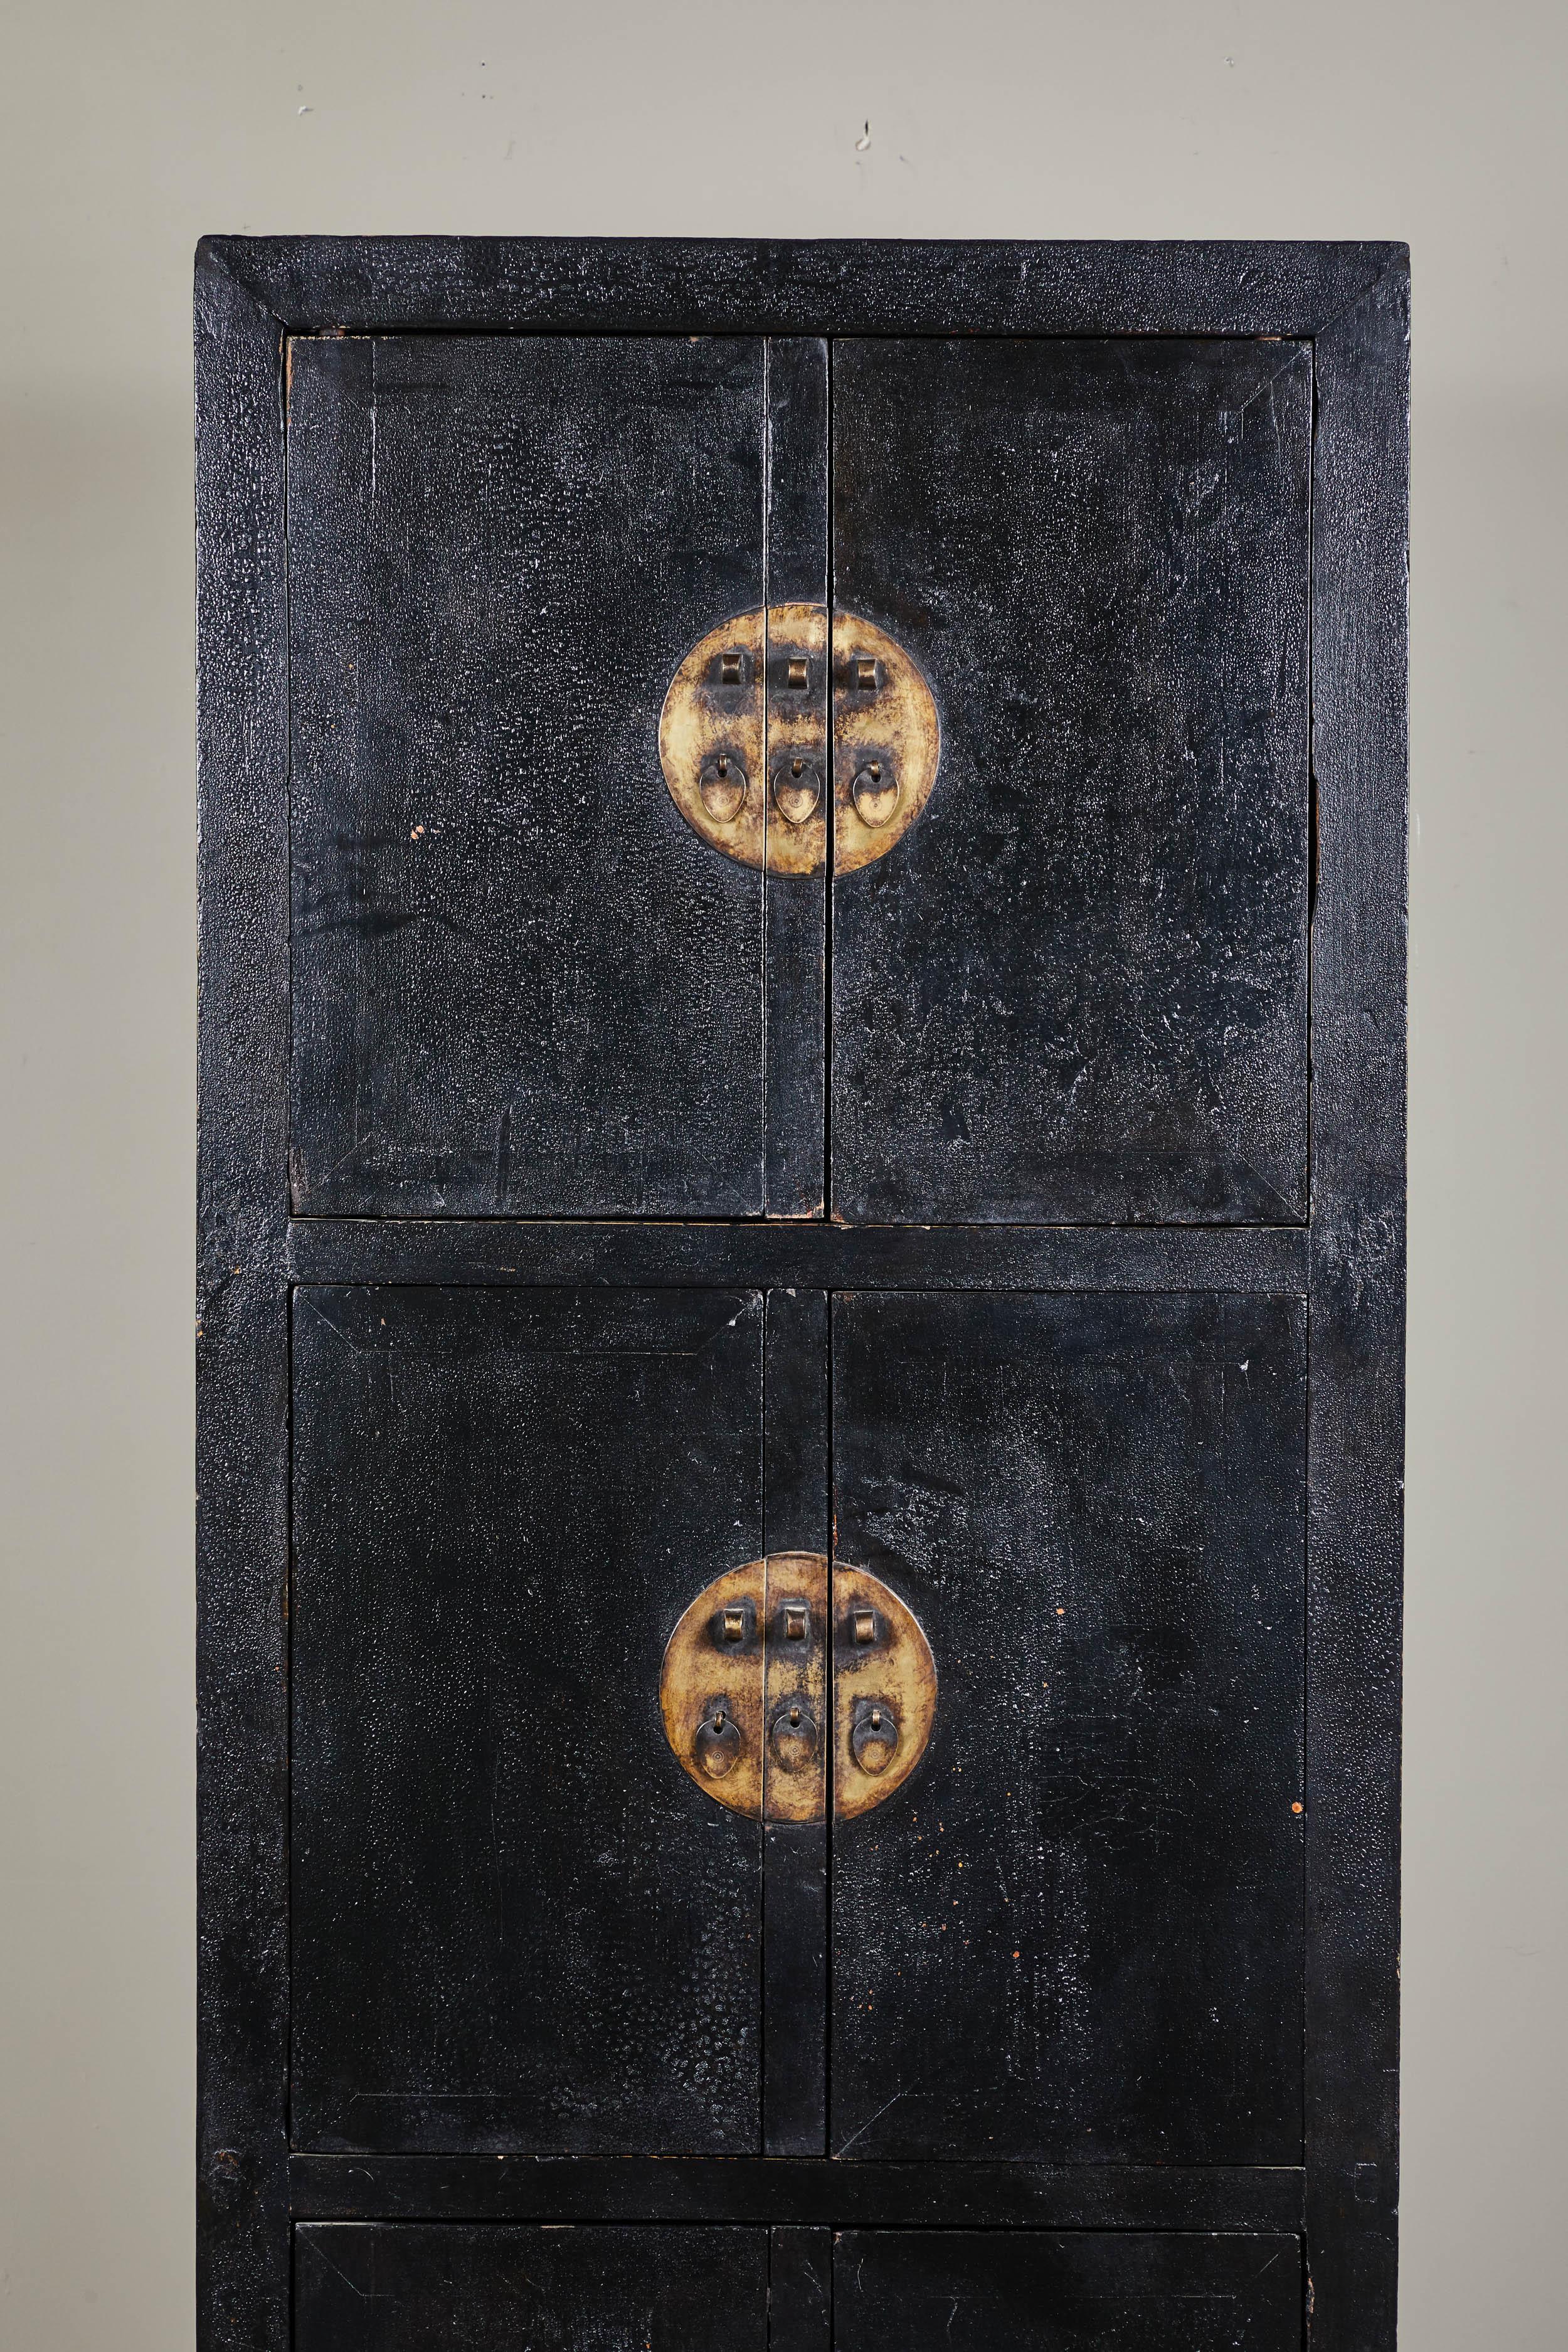 Tall 18th century Chinese black lacquer cabinet. A one-of-a-kind narrow six door tall cabinet with cracked black lacquer finish.